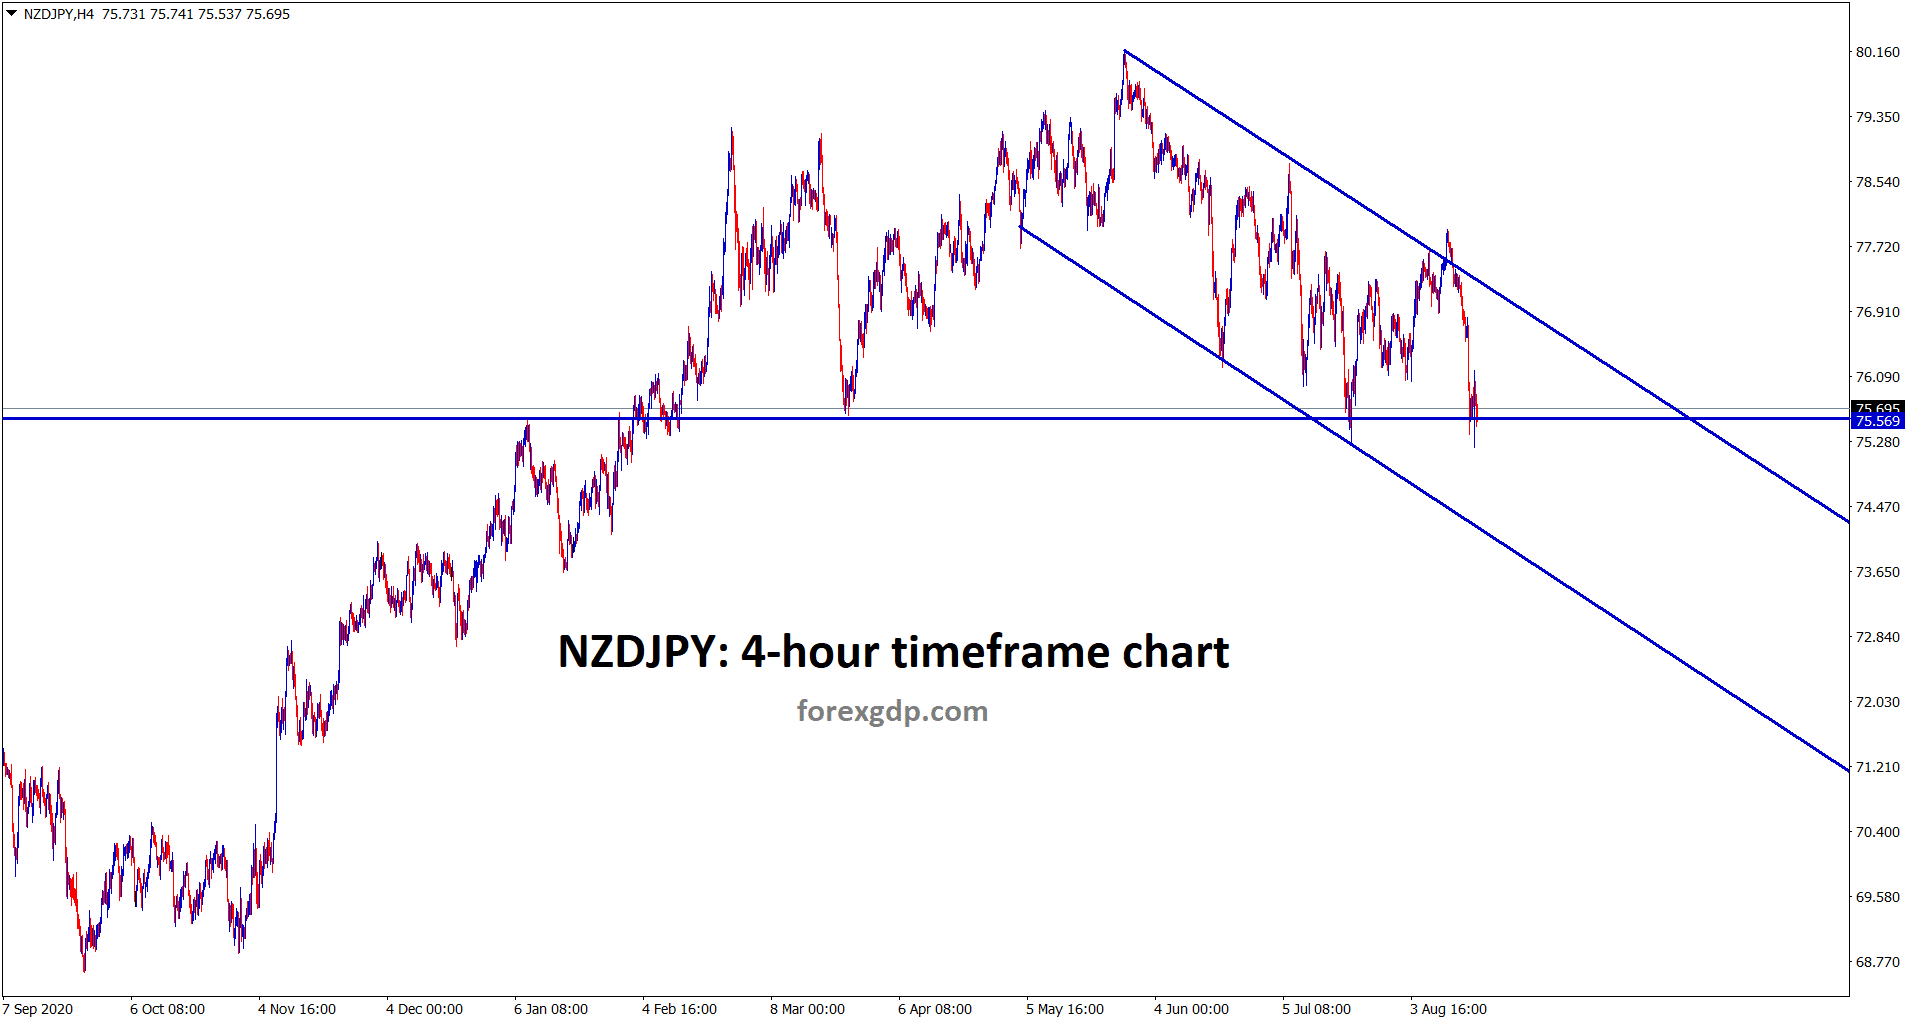 NZDJPY is moving in a descending channel and now it reached the support area wait for the breakout or reversal